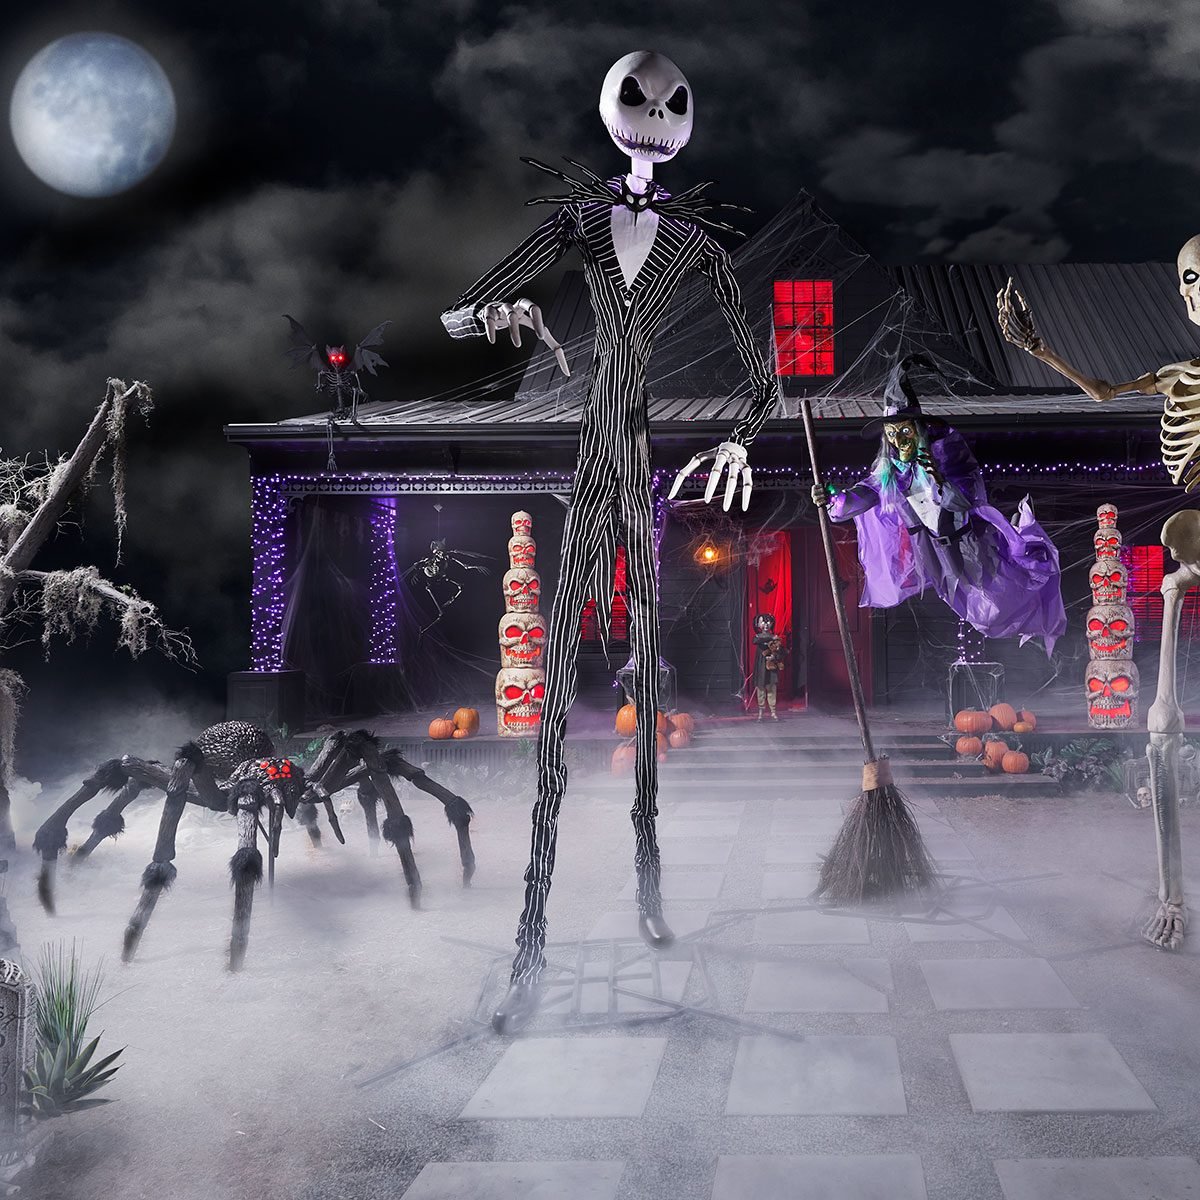 The Home a Halloween Depot Selling Piece 13-Foot Skellington Is Jack